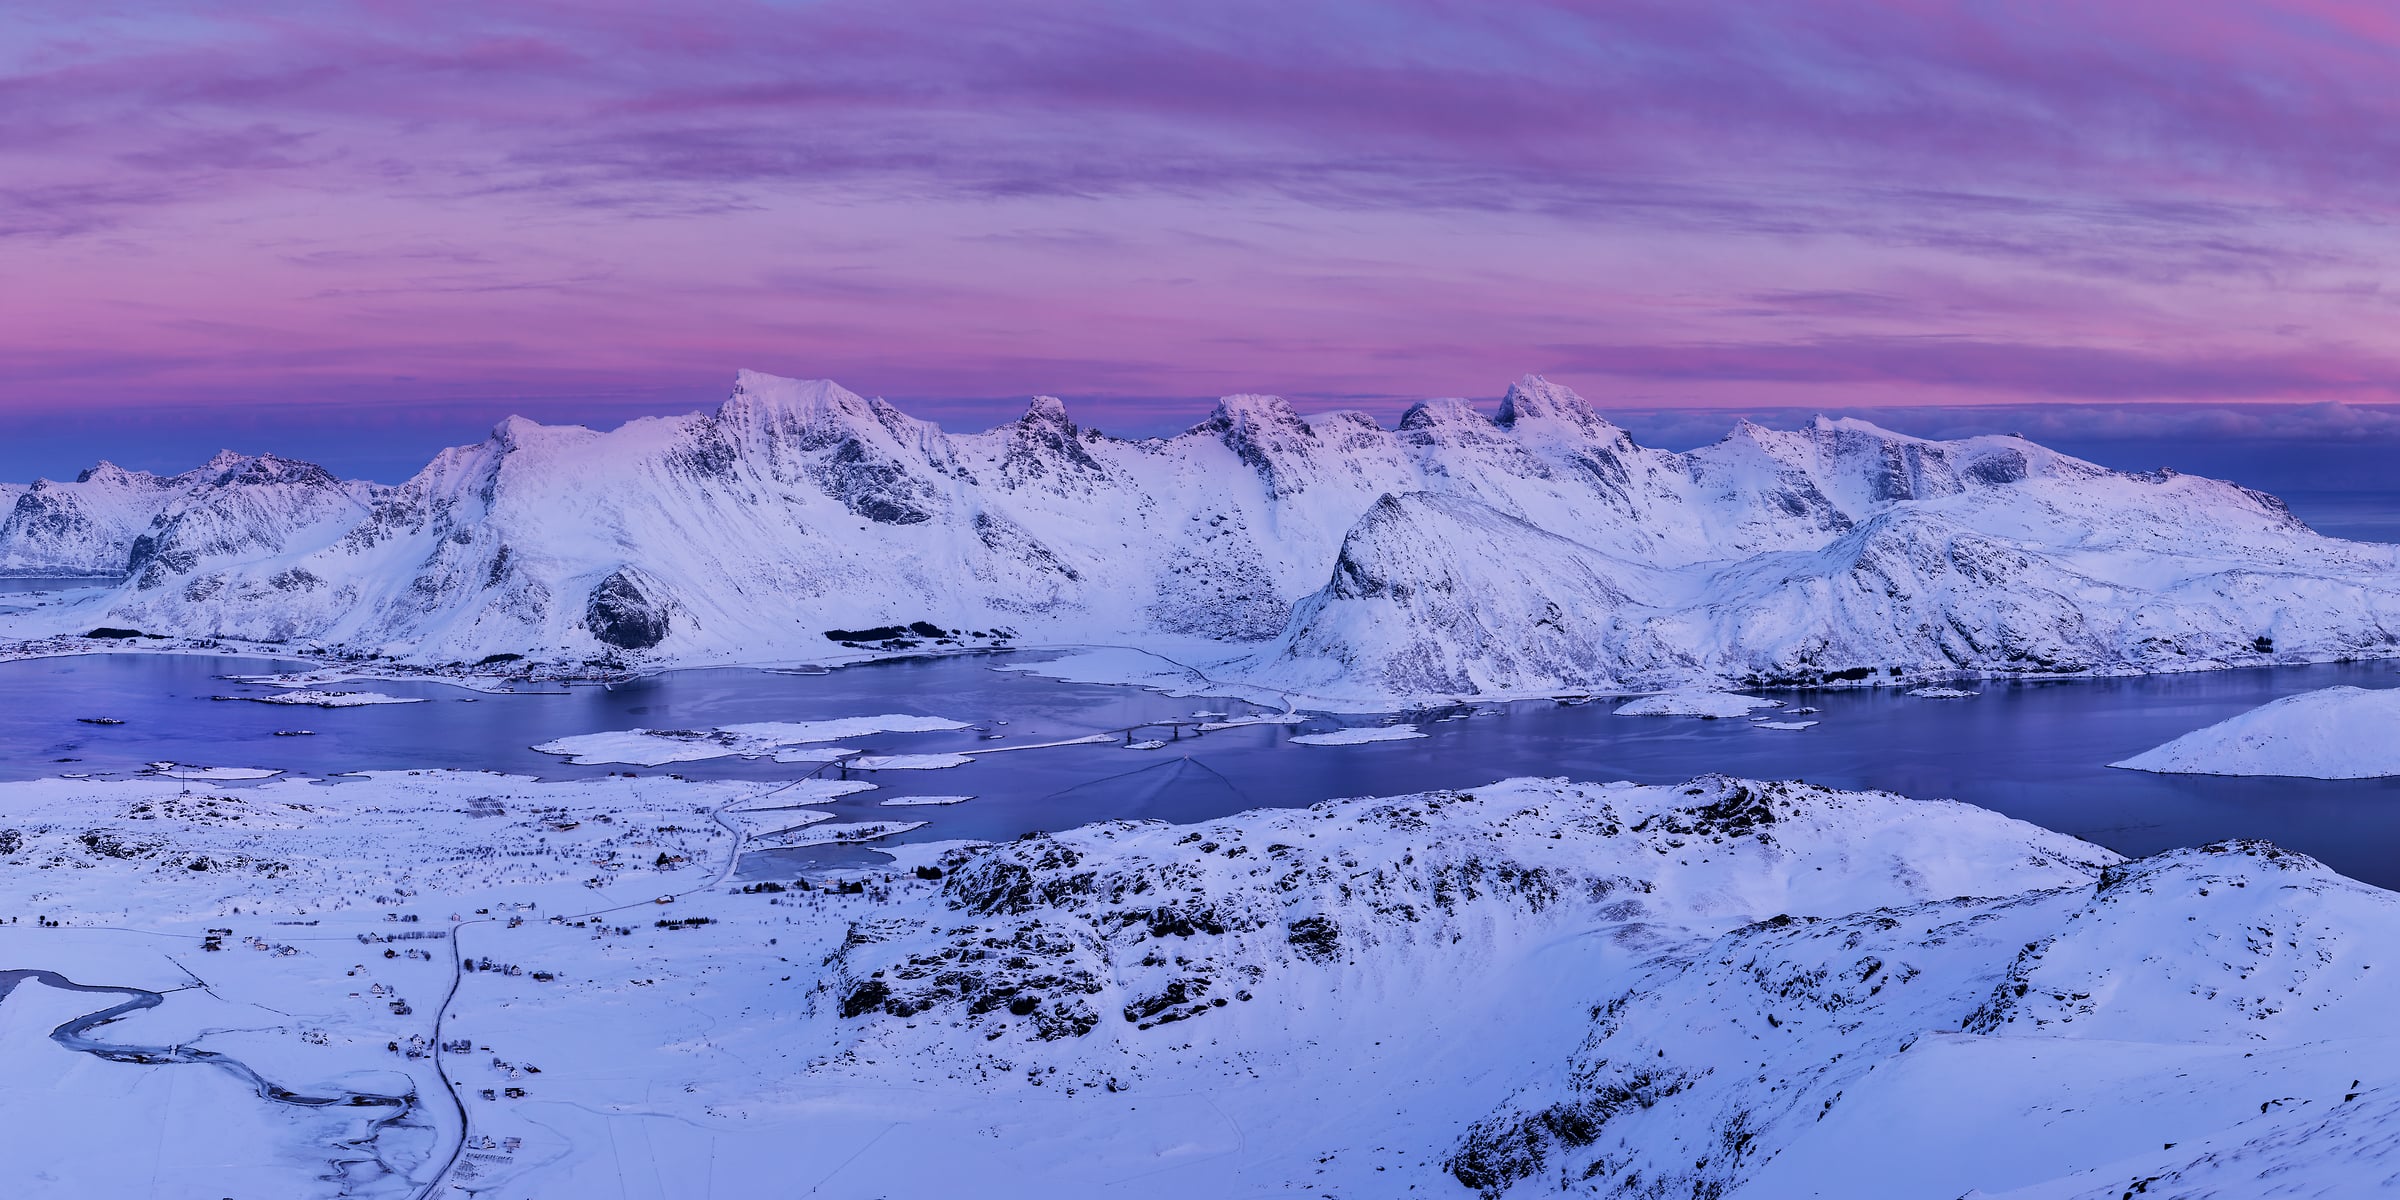 1,040 megapixels! A very high resolution, large-format VAST photo print of a mountain range at sunset; landscape photograph created by Martin Kulhavy from Ryten Mountain, Lofoten, Norway.